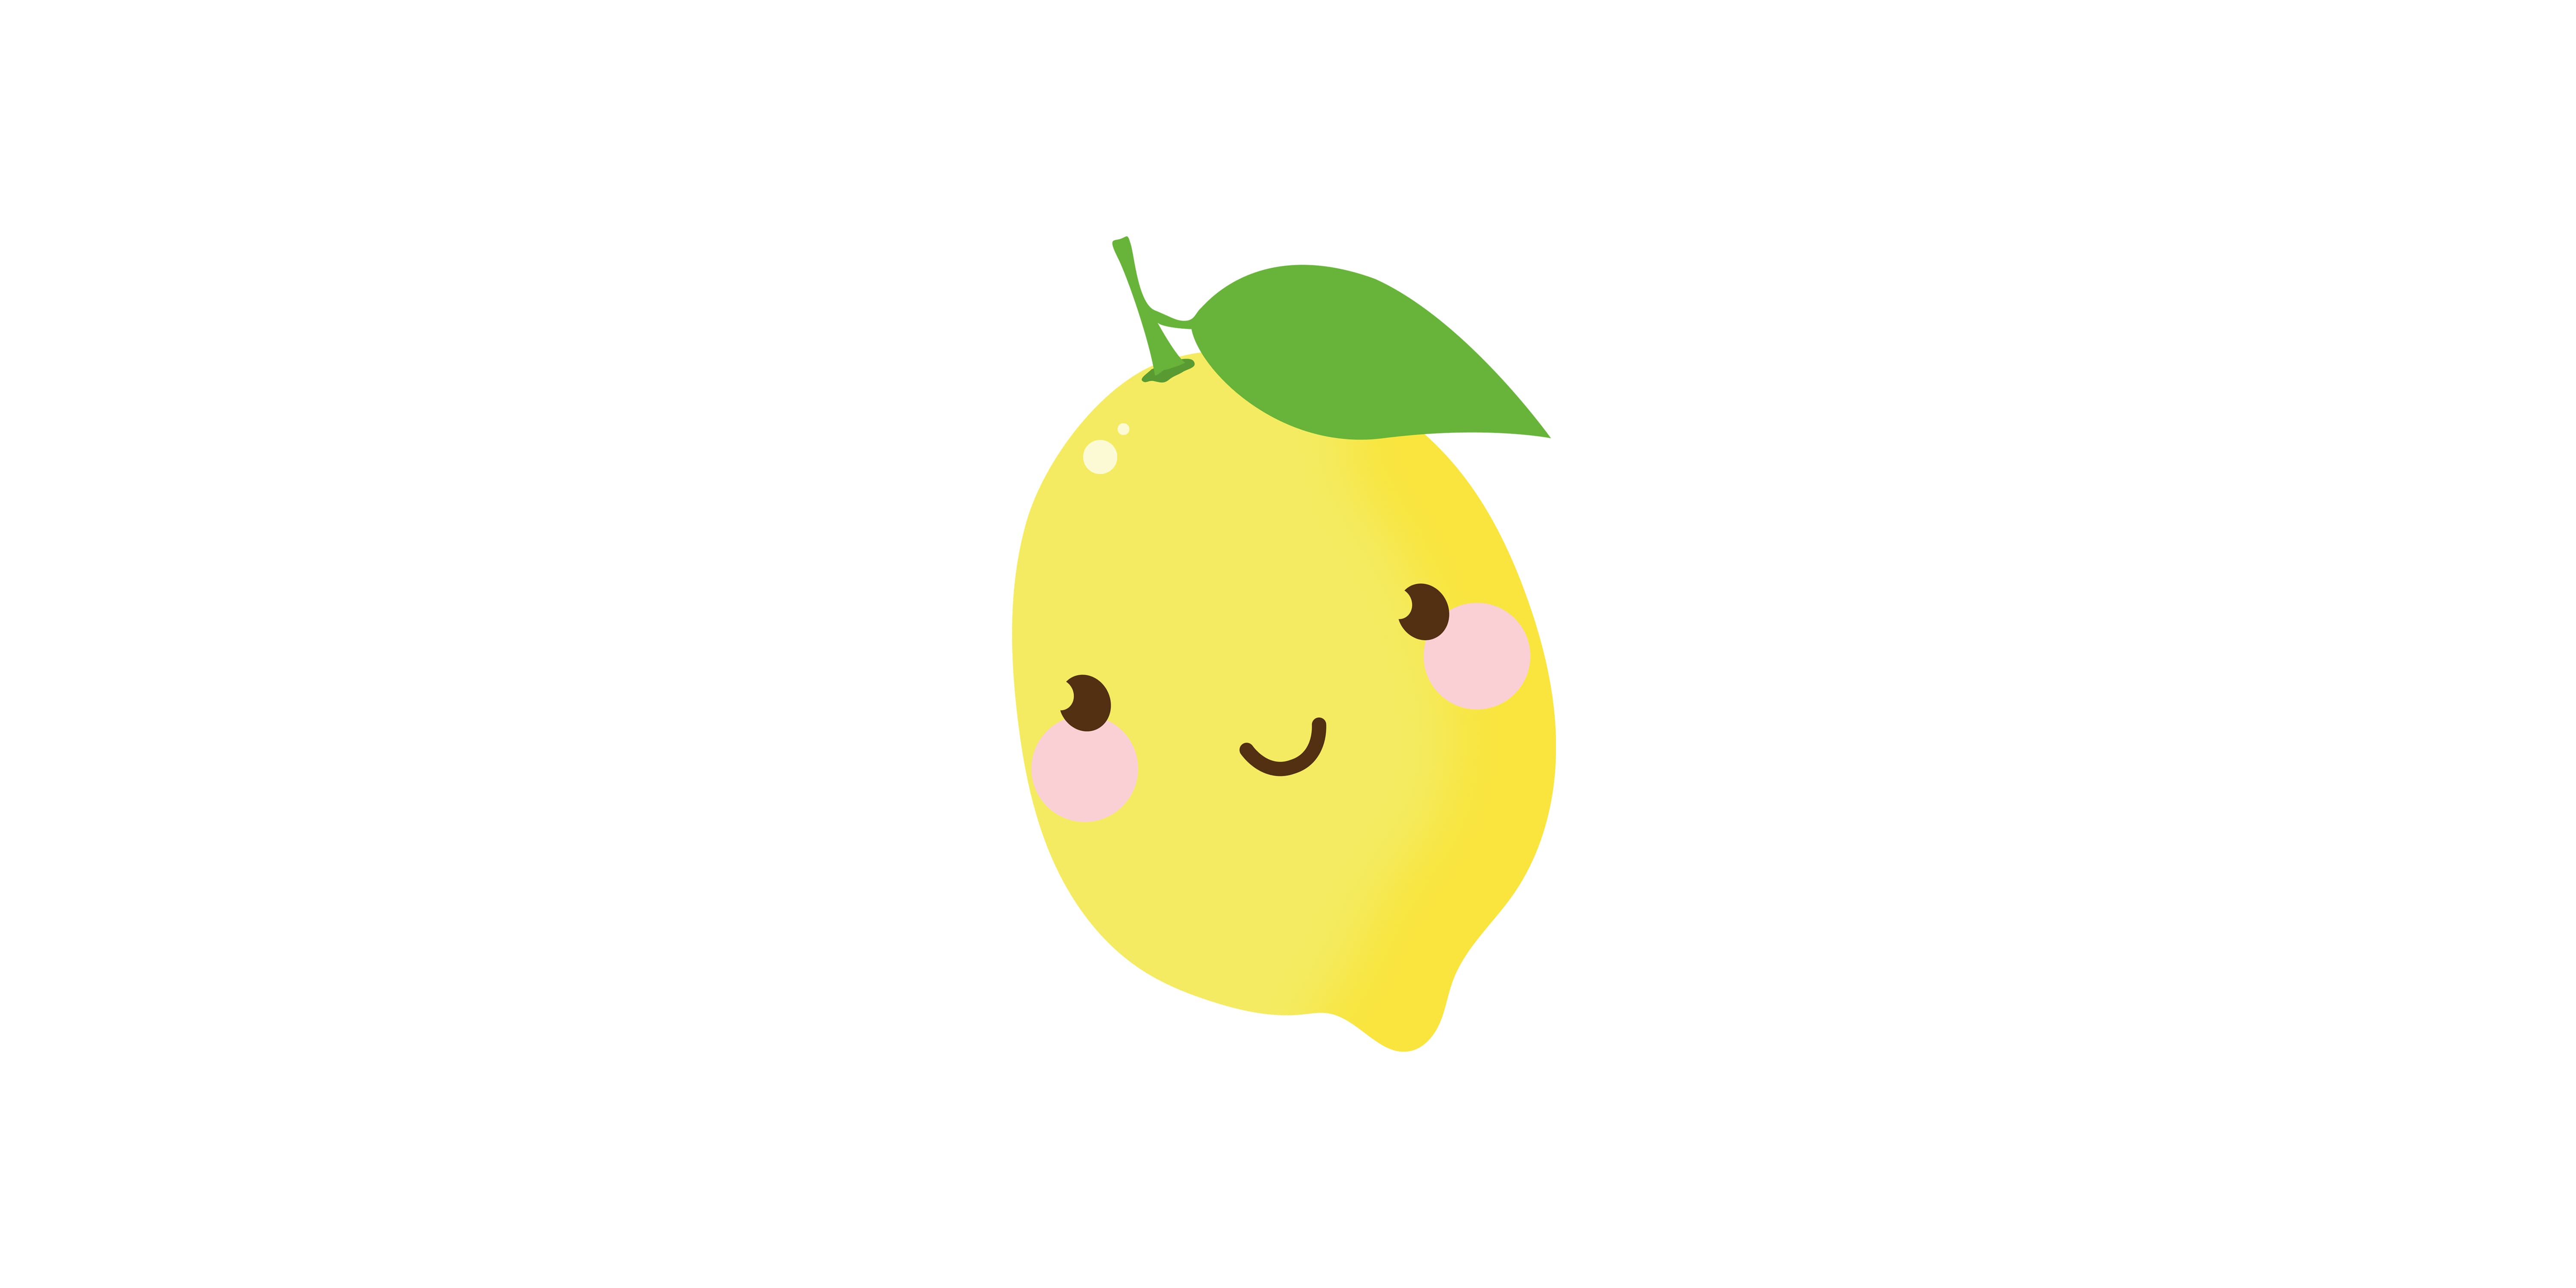 Your baby is now roughly the size of a lemon.